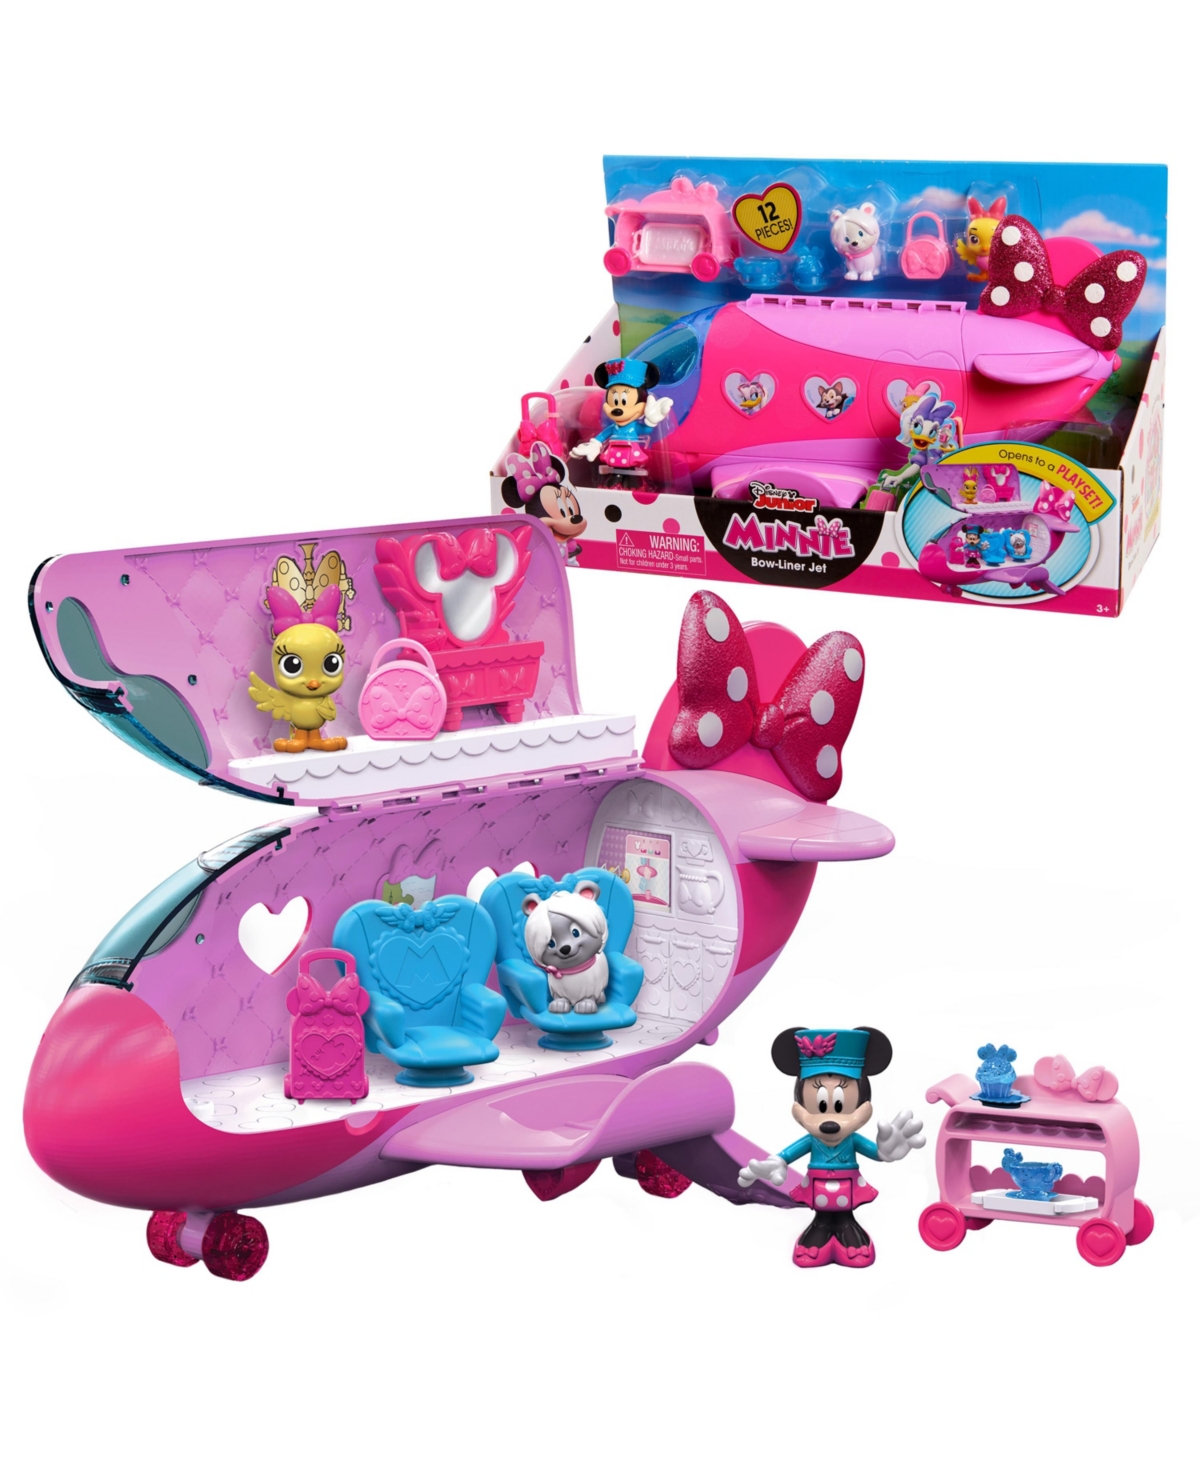 Sesame Street Kids' Macy's Disney Junior Minnie Mouse Bow Liner Jet Toy Figures And Playset